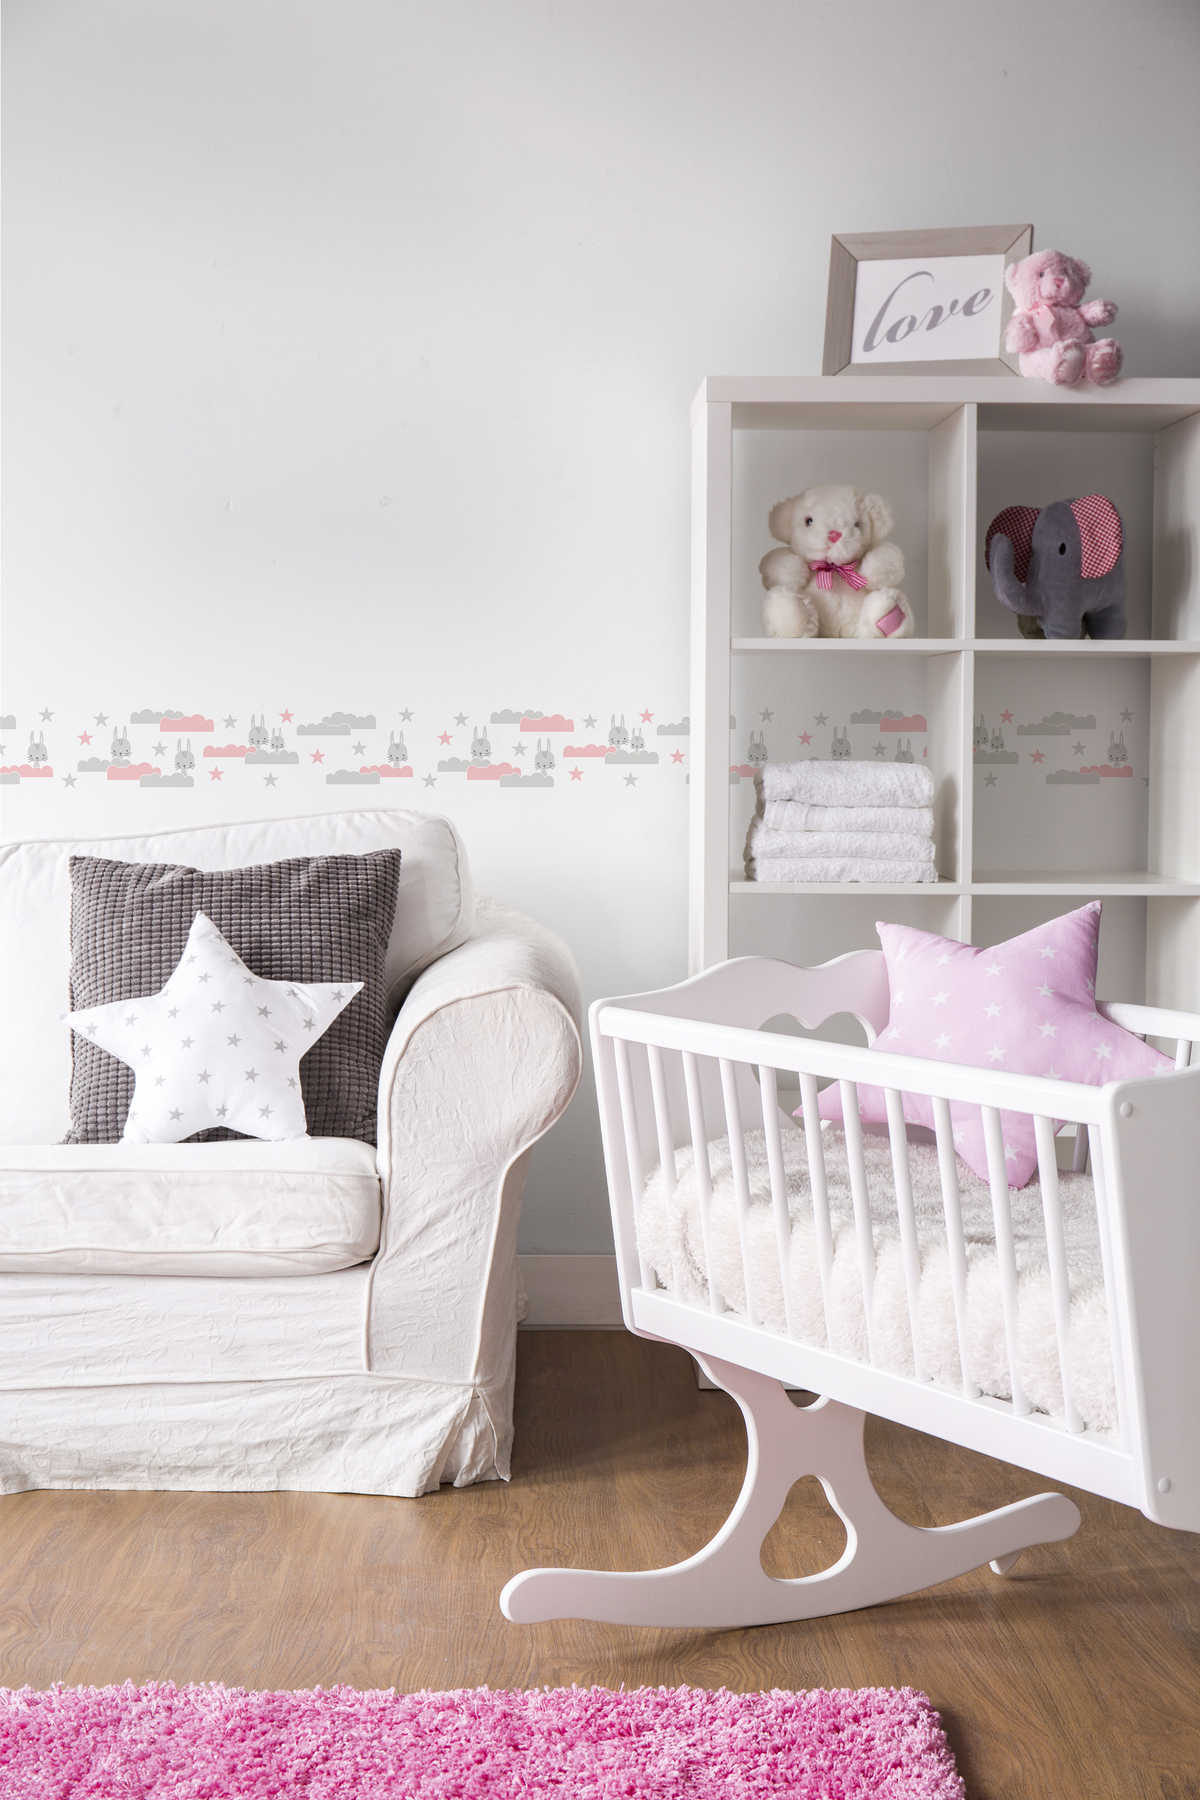             Baby room wallpaper "Bunny on cloud 7" for girls - grey, pink, white
        